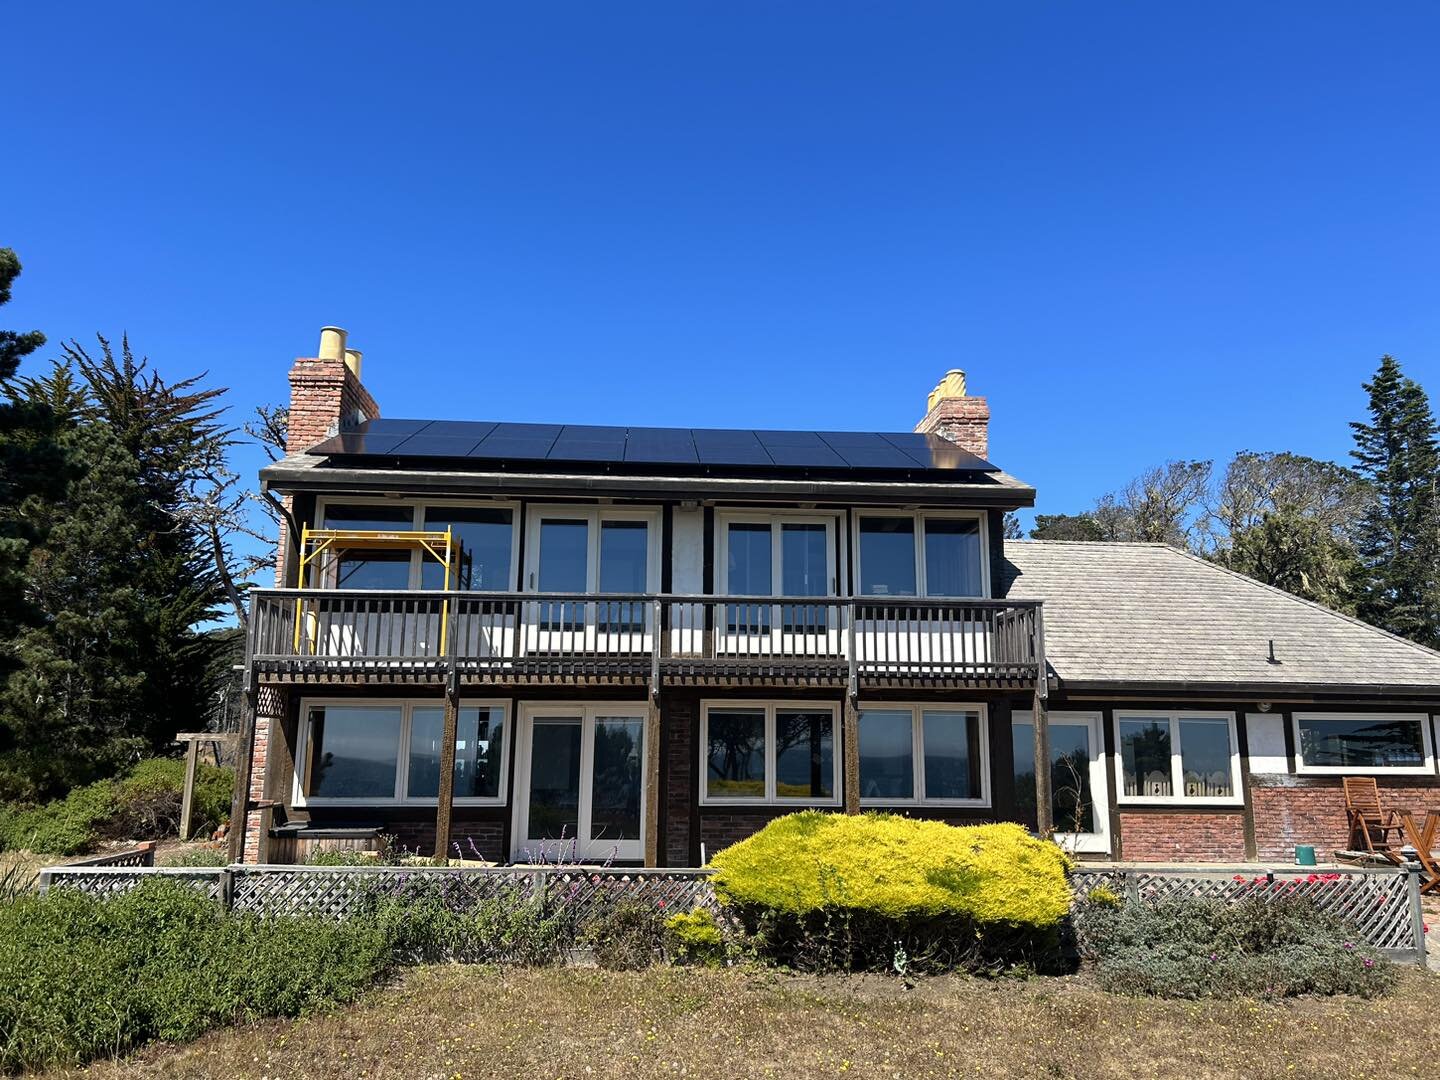 Blue skies and moderate temperatures, the perfect environment for generating solar power! Give us a call to find out how you could lower your energy bills and your carbon footprint on the Mendocino coast.